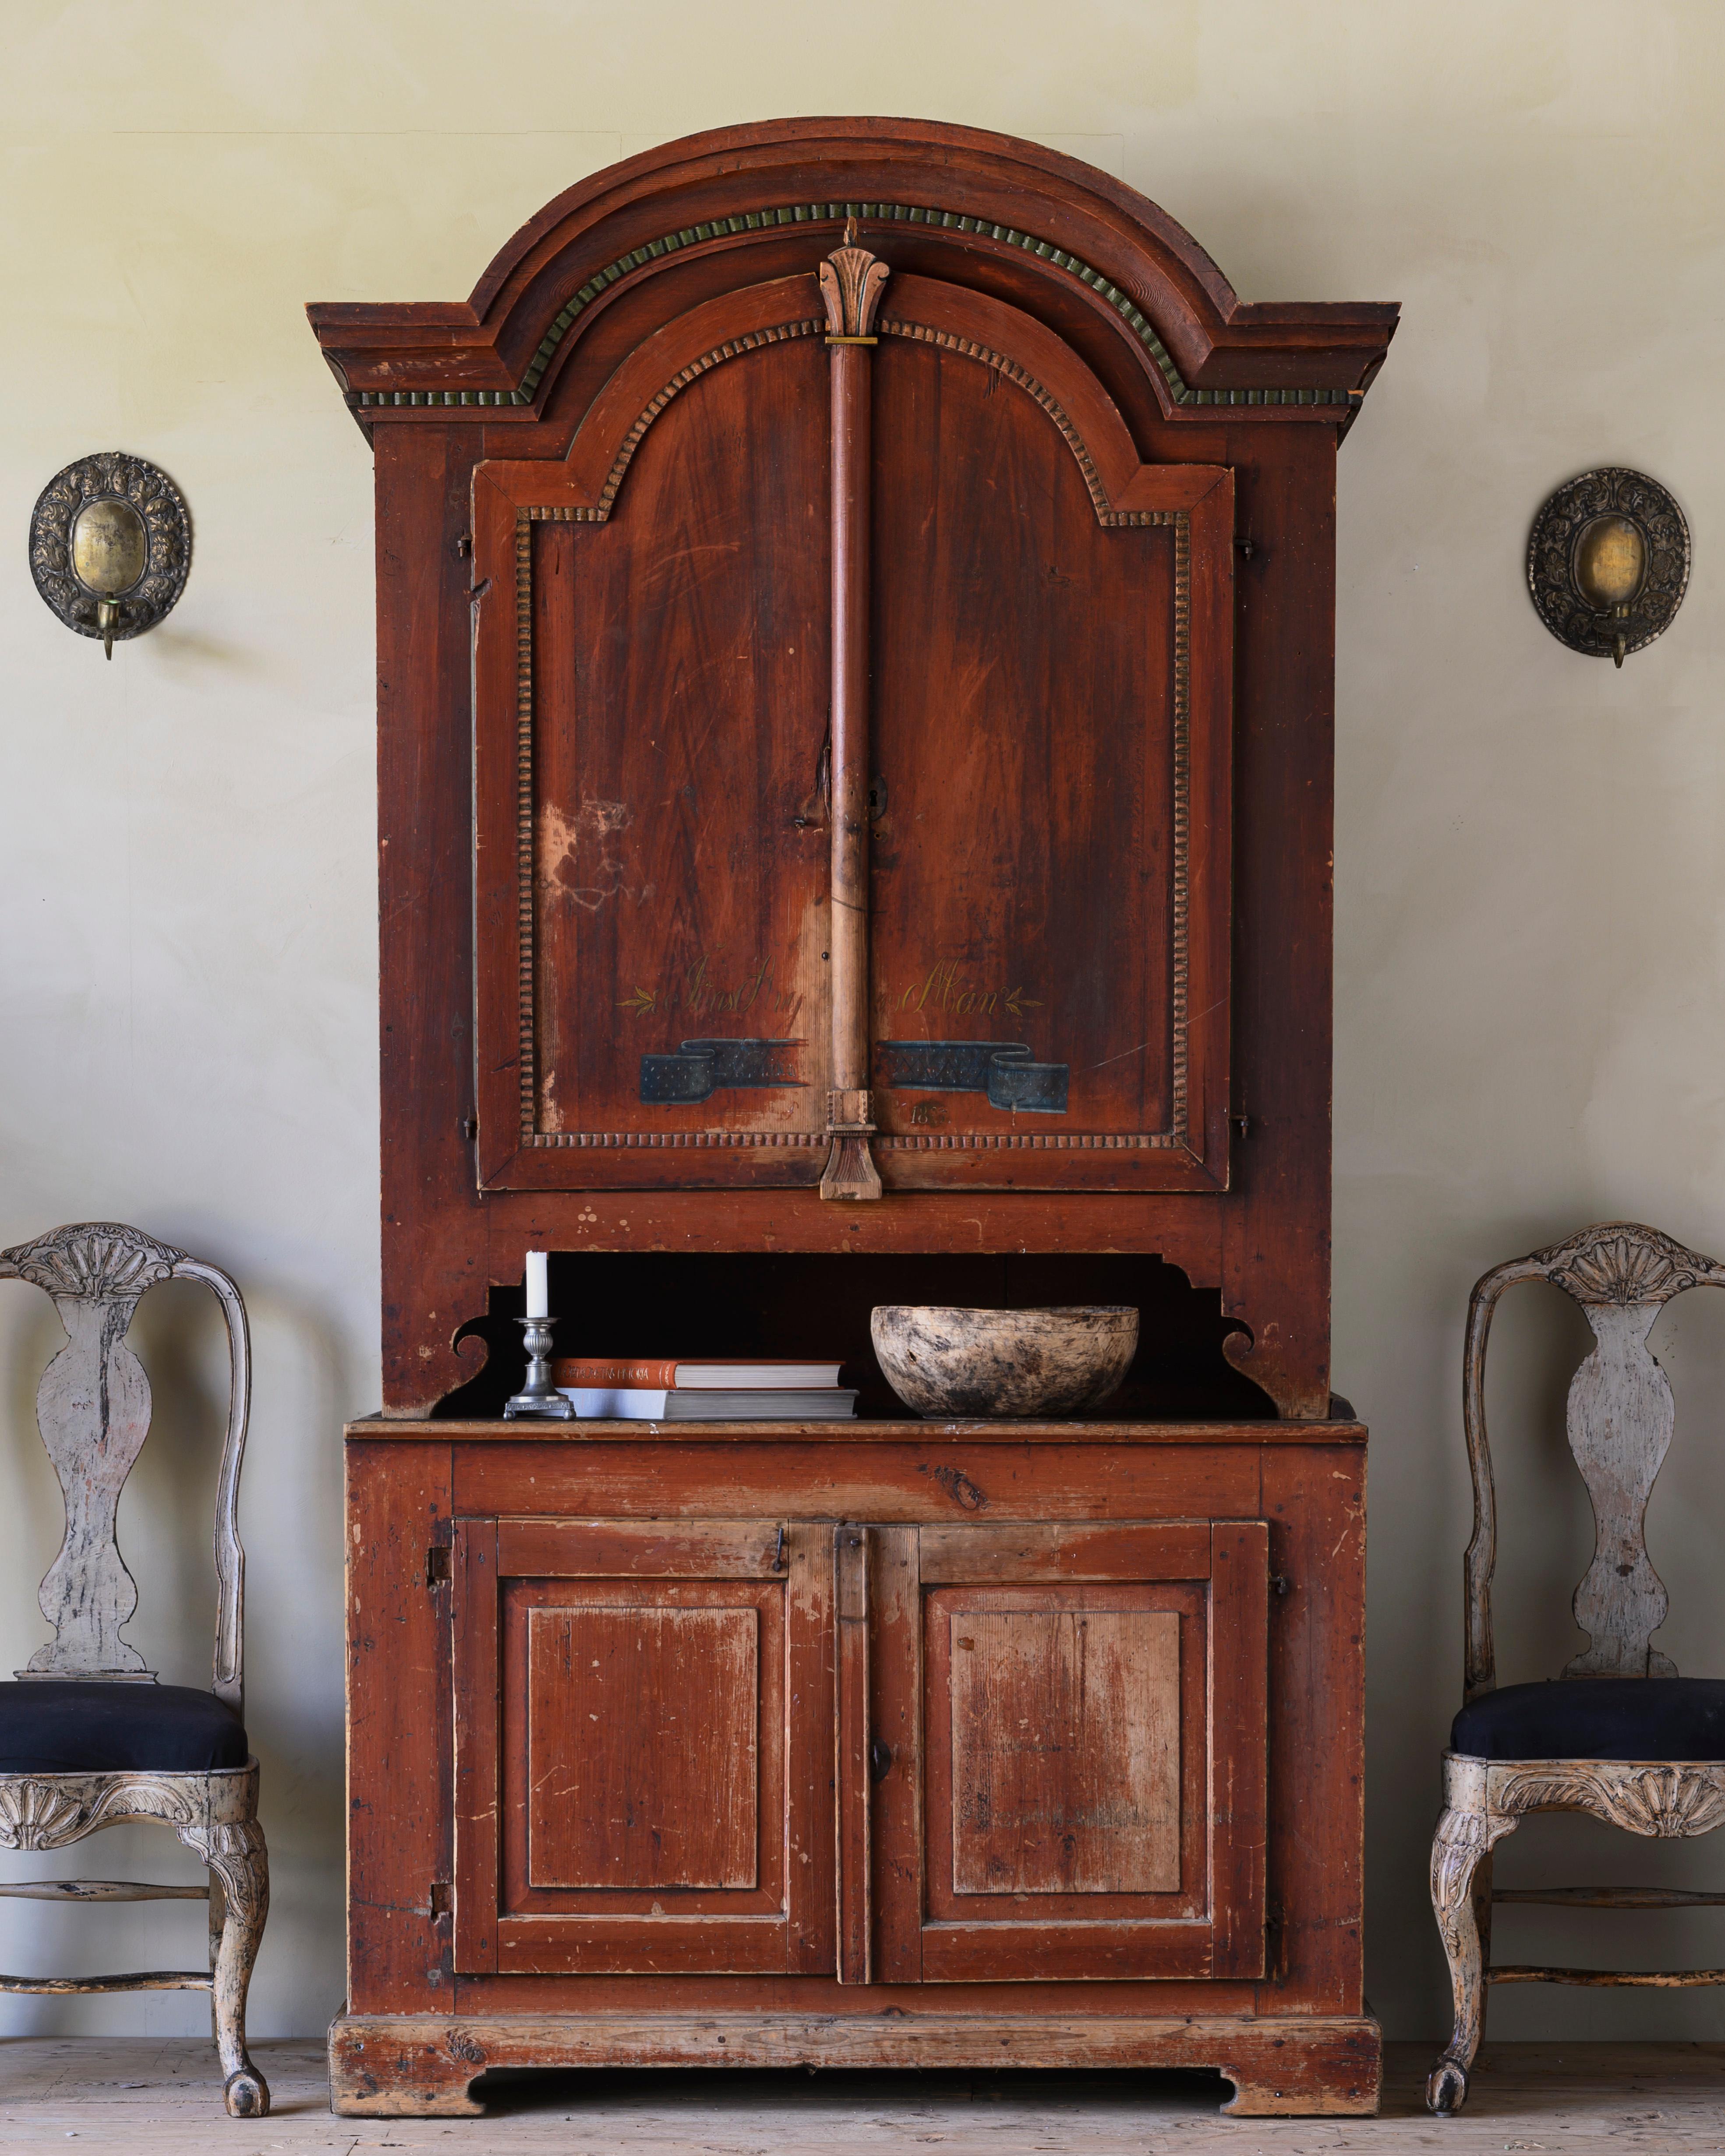 Charming 19th century Swedish provincial Gustavian cabinet in its original colour and dated 1827.